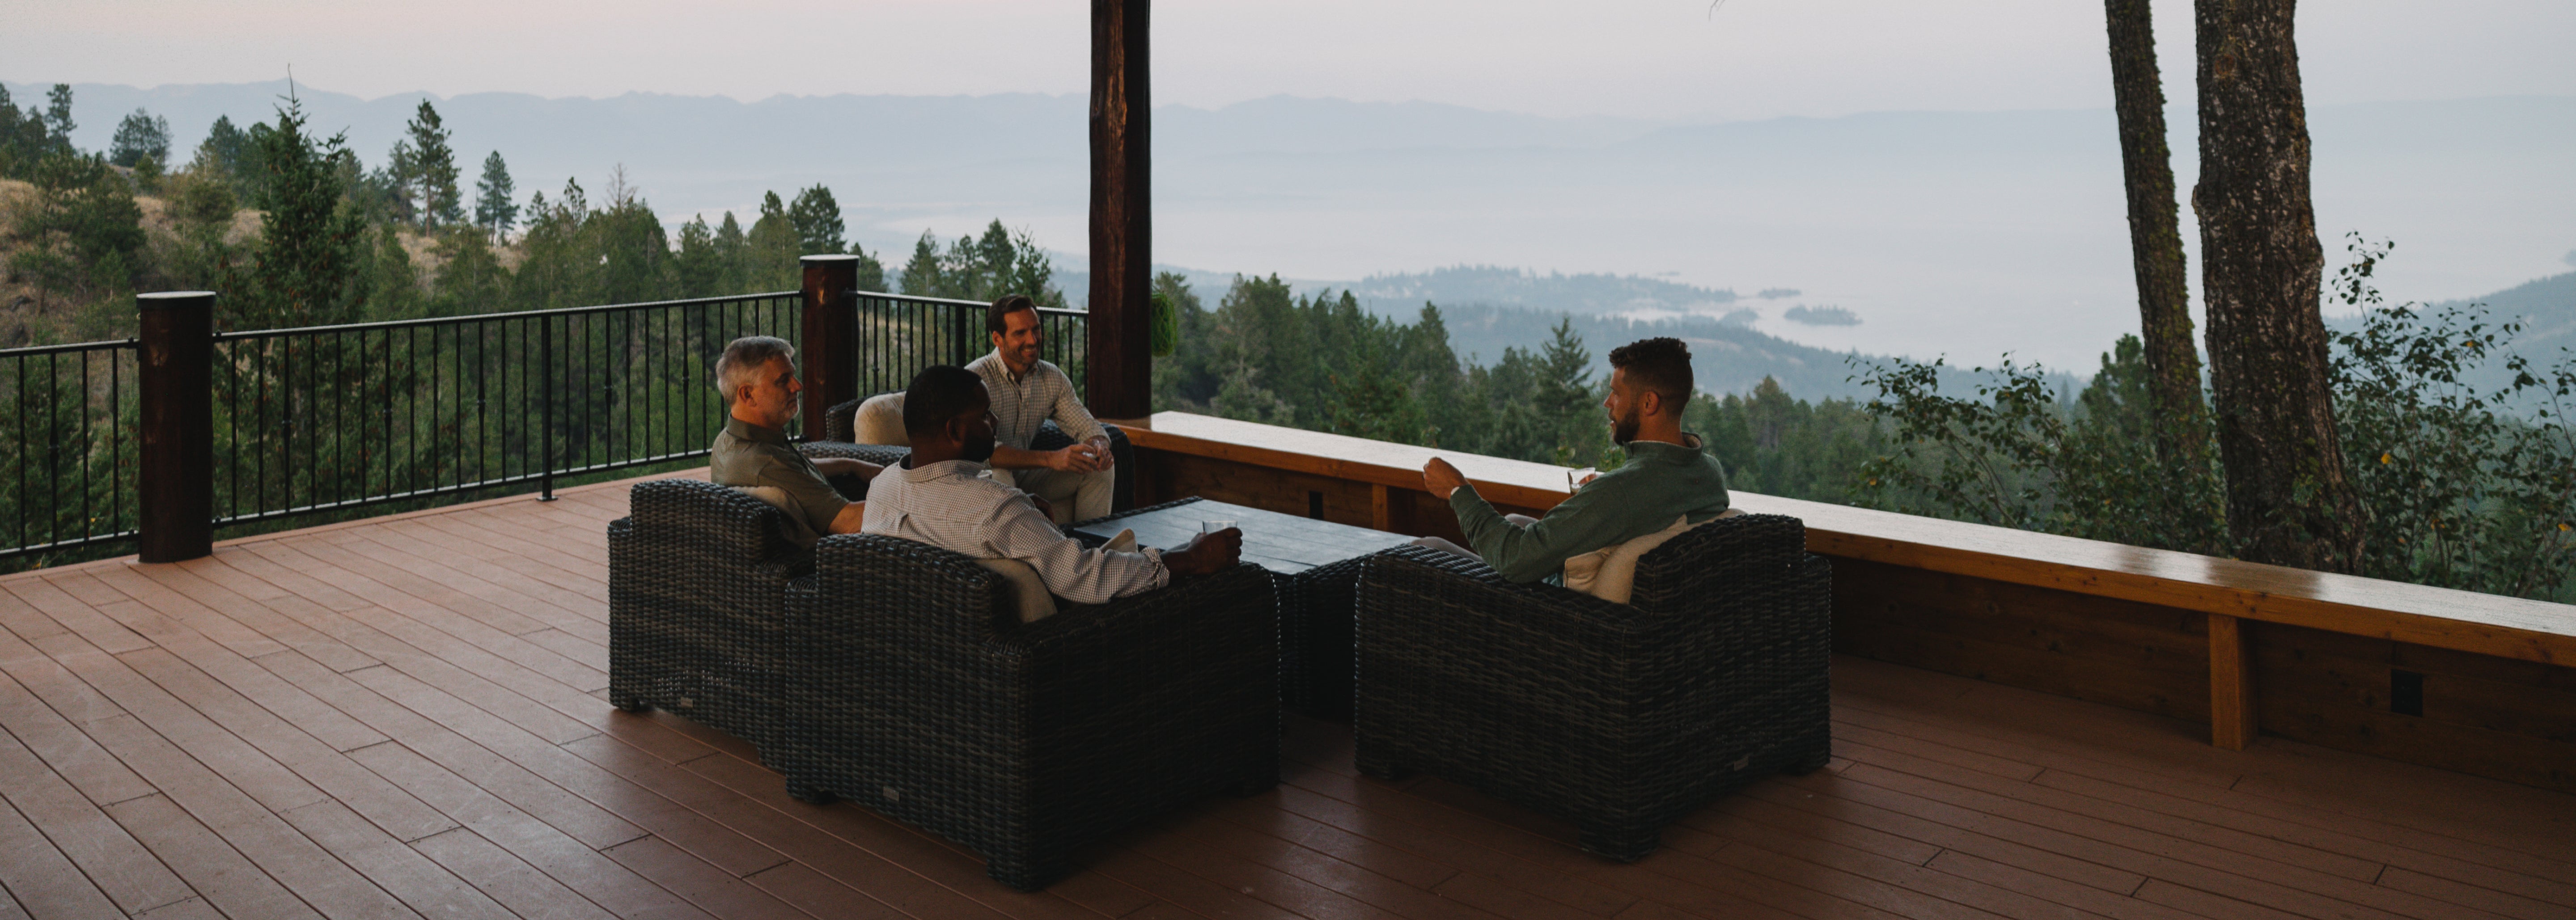 men sitting on a porch relaxing at a lodge wearing GenTeal mens clothing